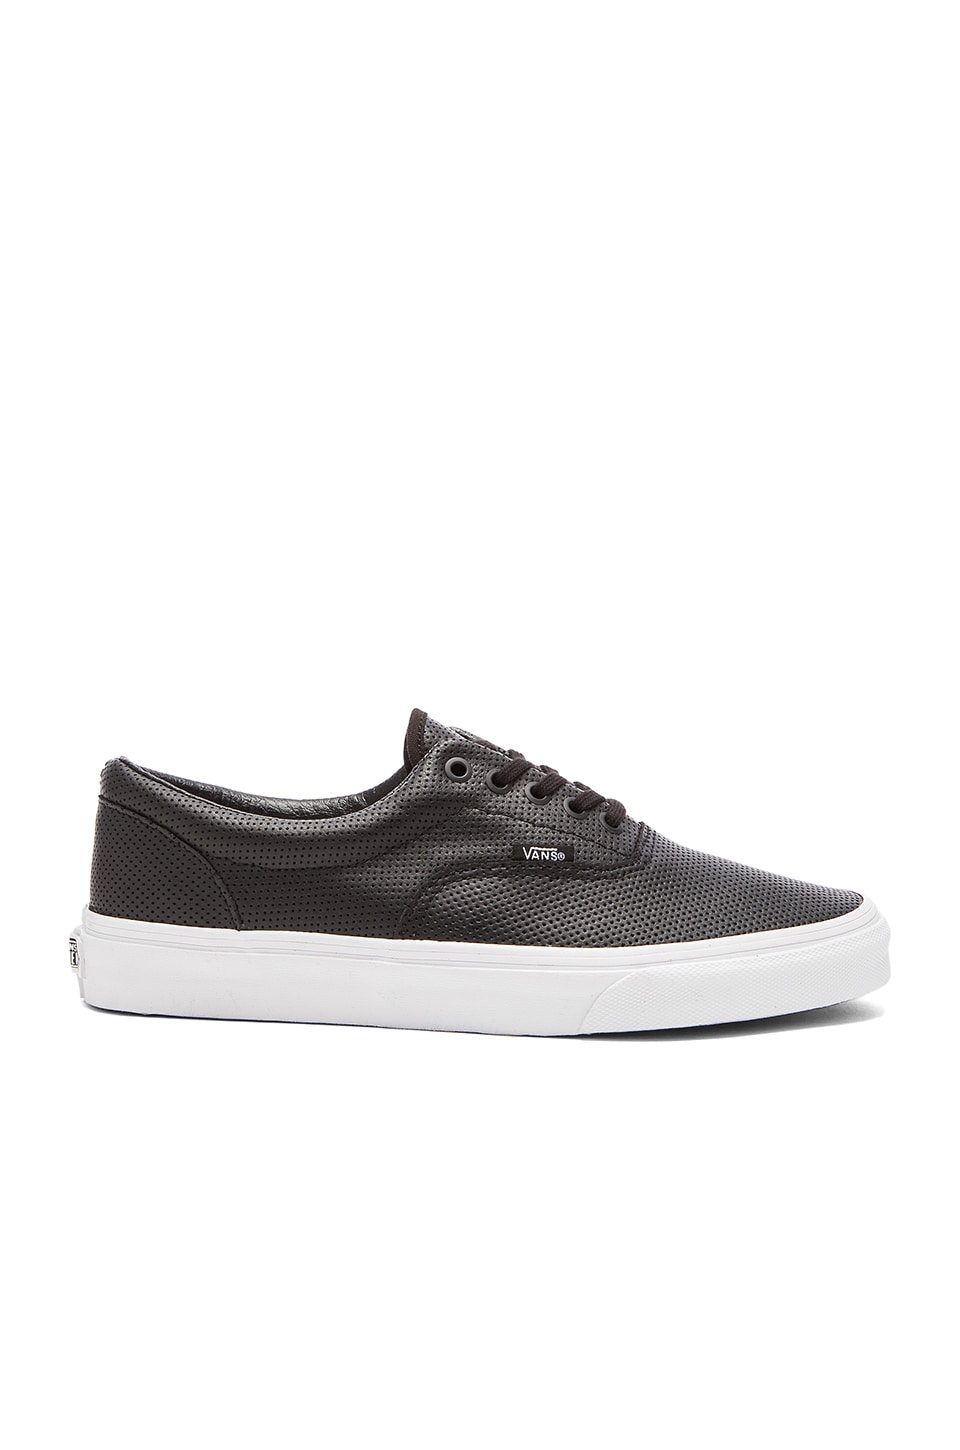 leather vans afterpay